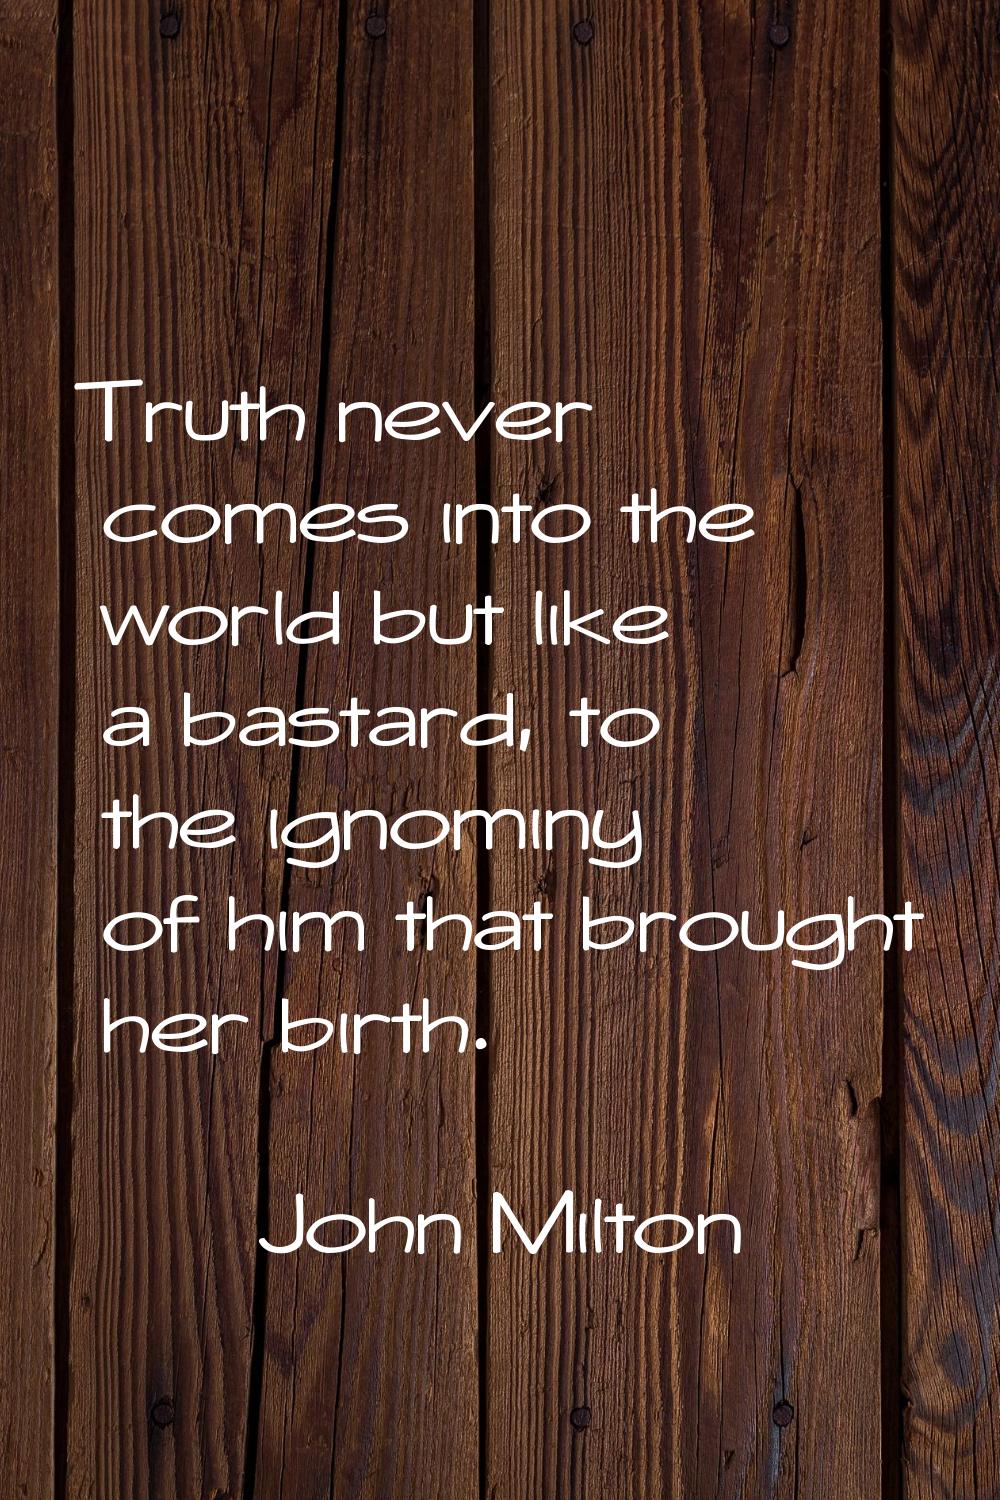 Truth never comes into the world but like a bastard, to the ignominy of him that brought her birth.